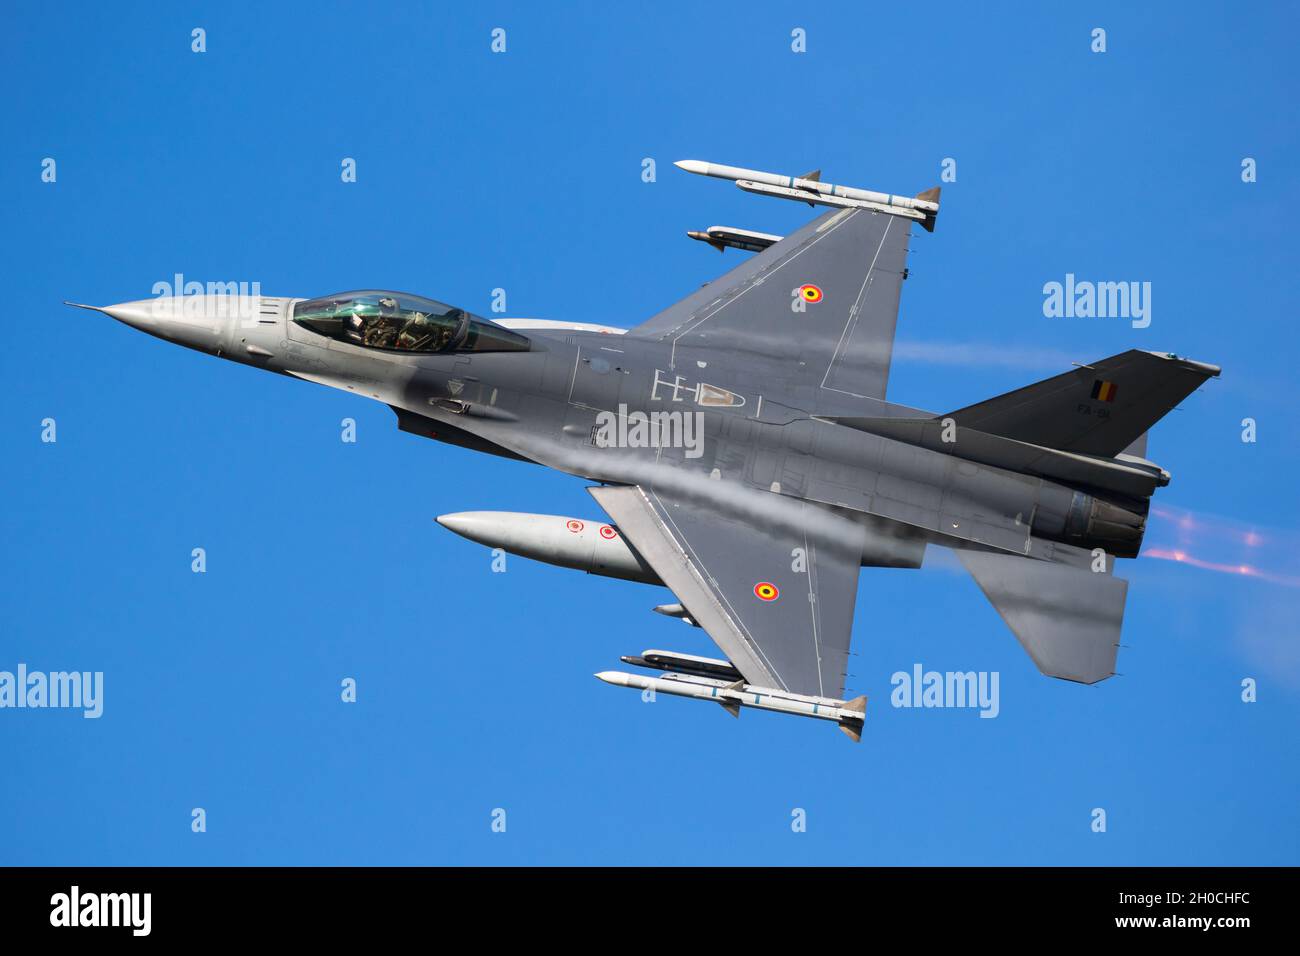 Belgian Air Force General Dynamics F-16 Fighting Falcon multirole fighter jet taking off from Leeuwarden Air Base. October 7, 2021 Stock Photo